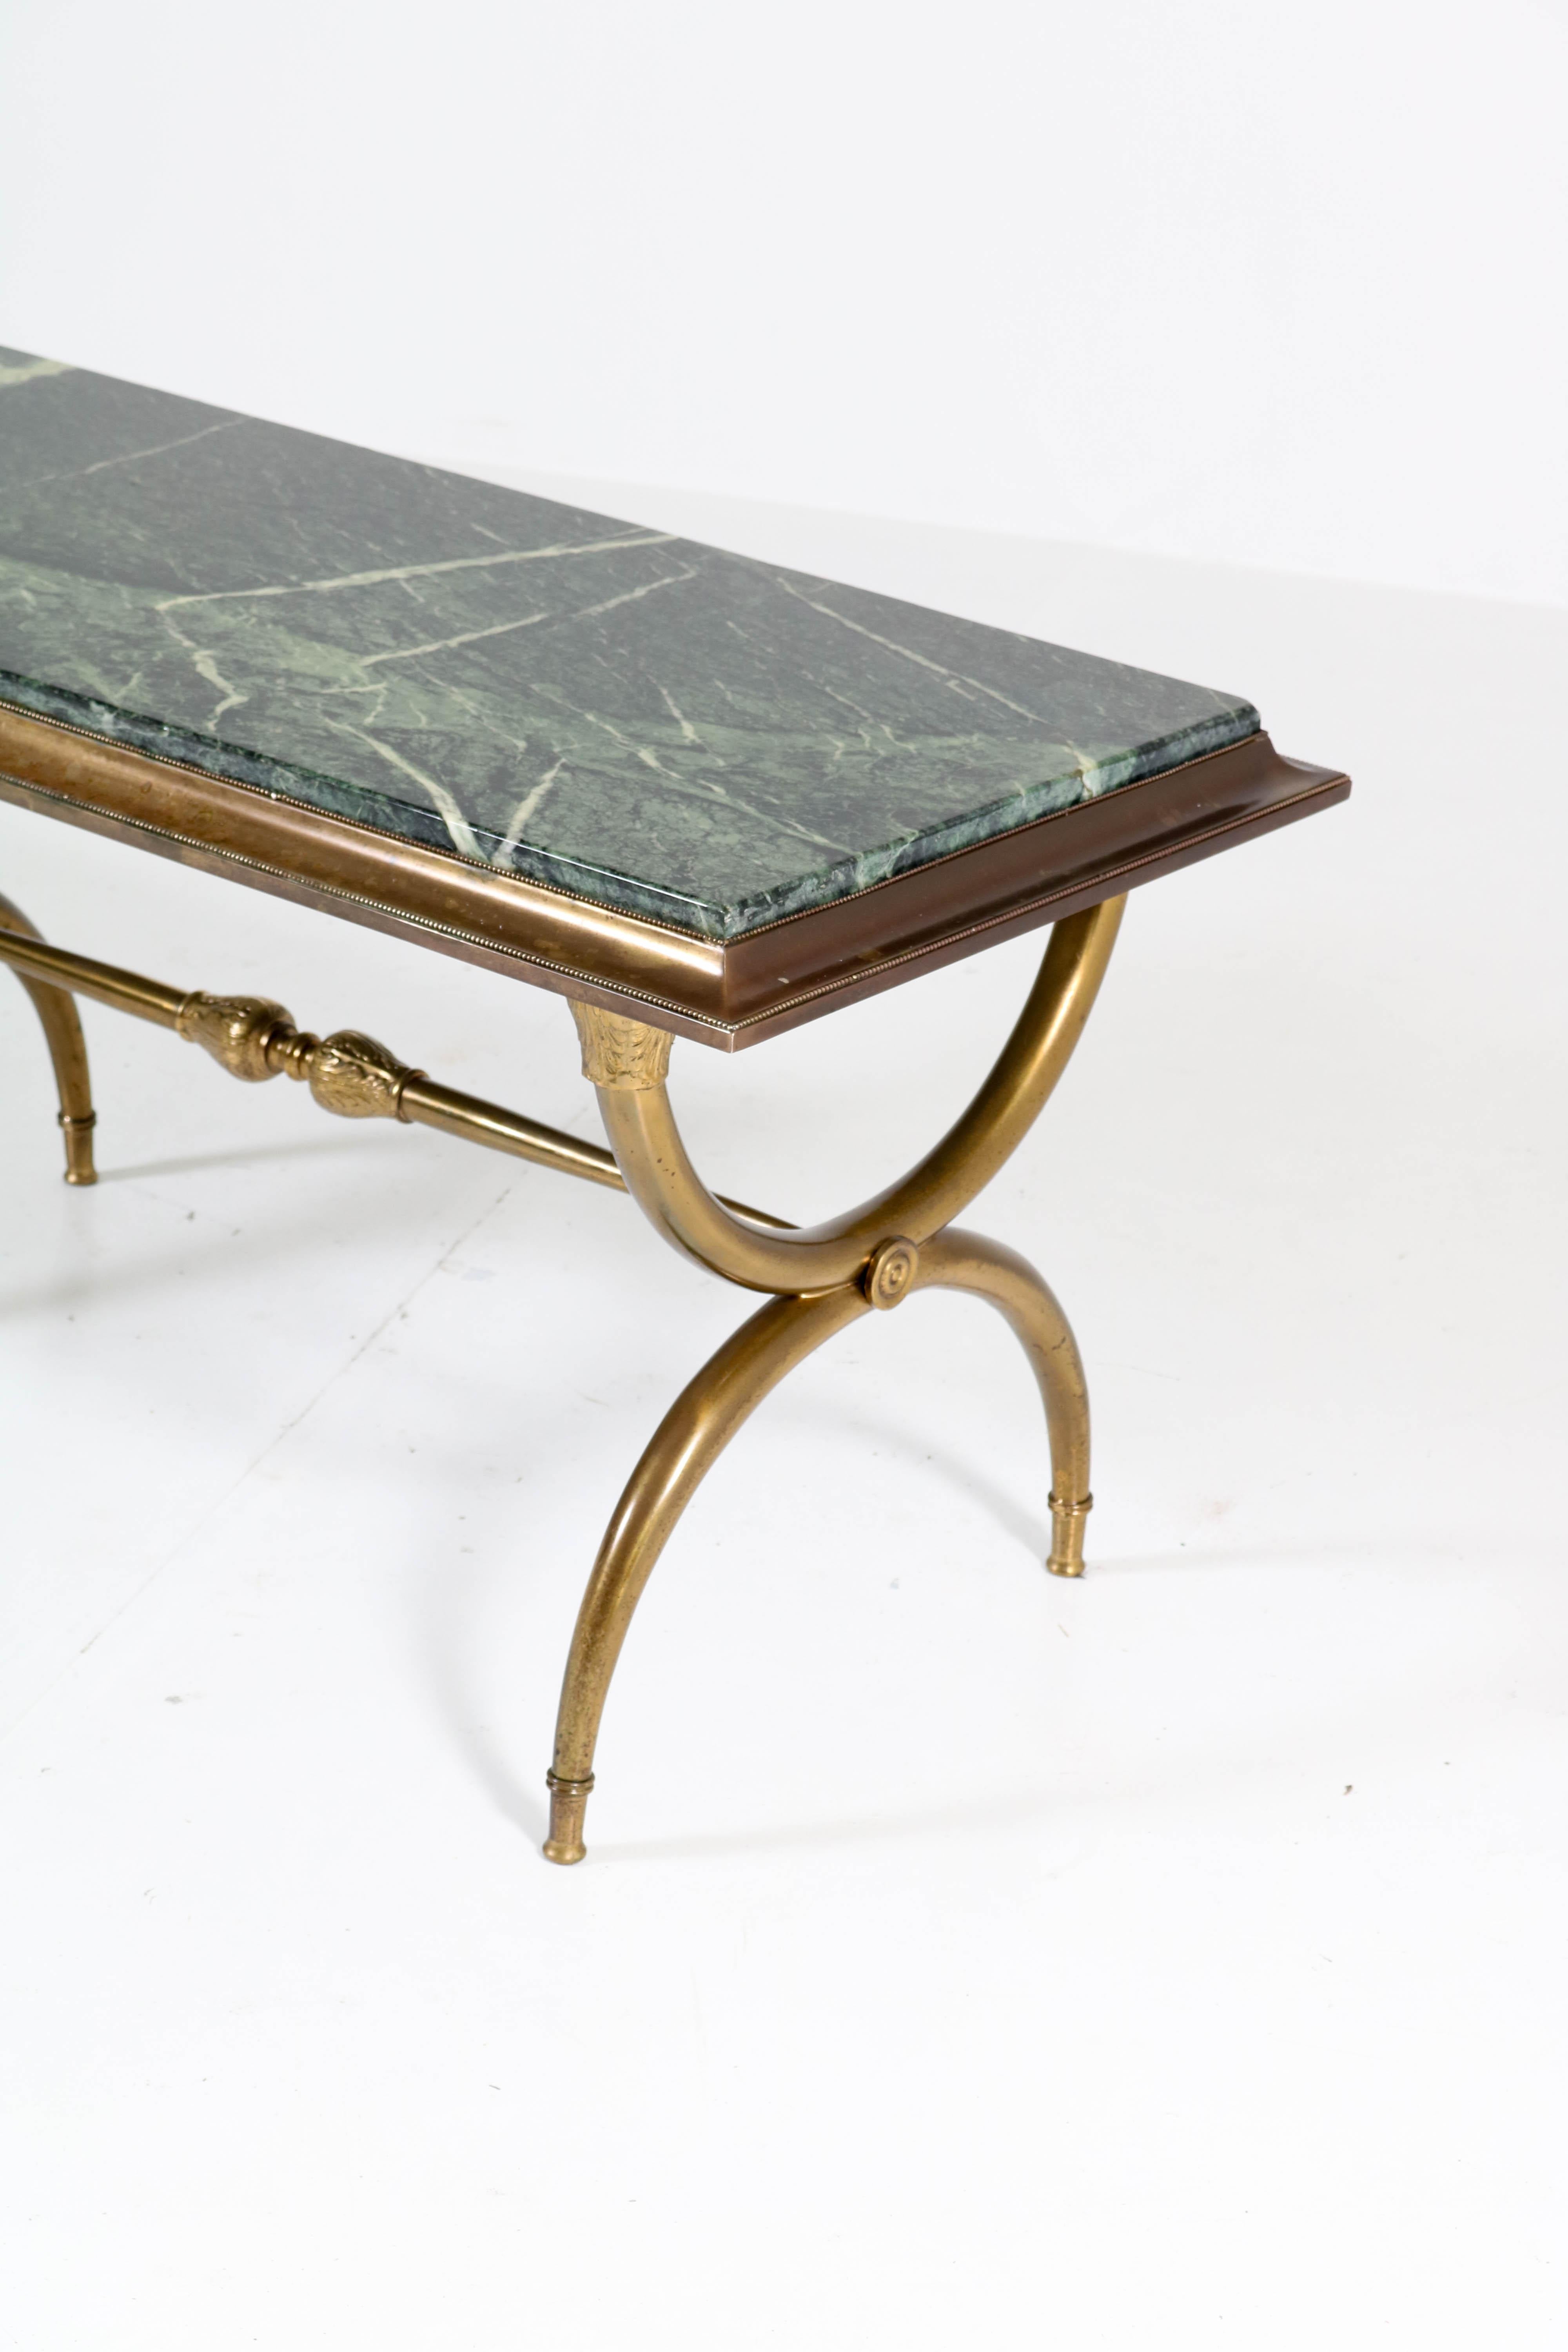 Stunning and rare Hollywood Regency coffee table.
In the style of Maison Baguès.
Striking French design from the 1940s.
Brass base with original Patricia green marble top.
In good original condition with minor wear consistent with age and